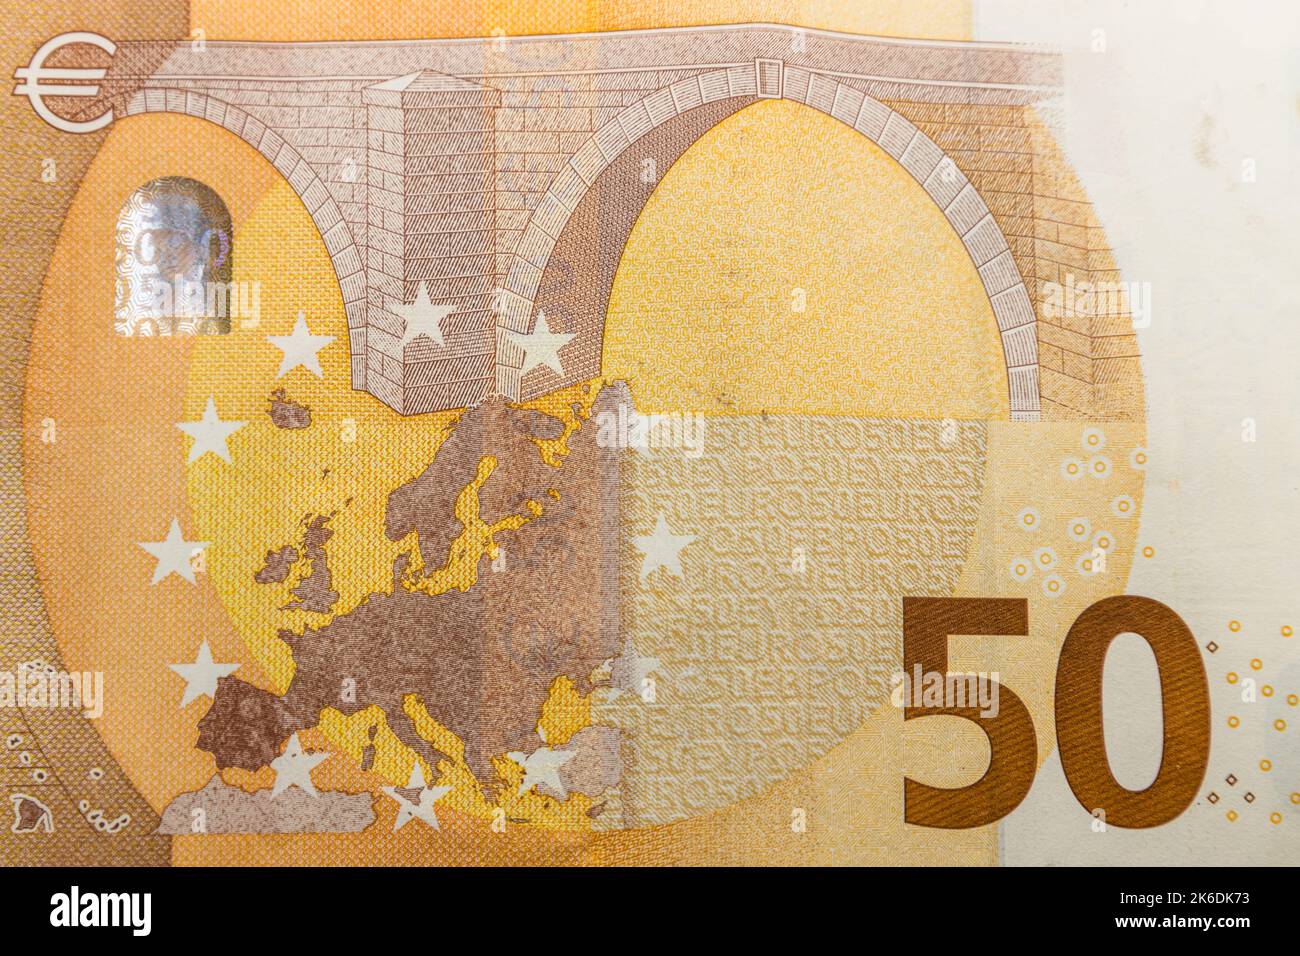 Europe map on a fifty euro banknote bill. Concept of uniting European countries Stock Photo